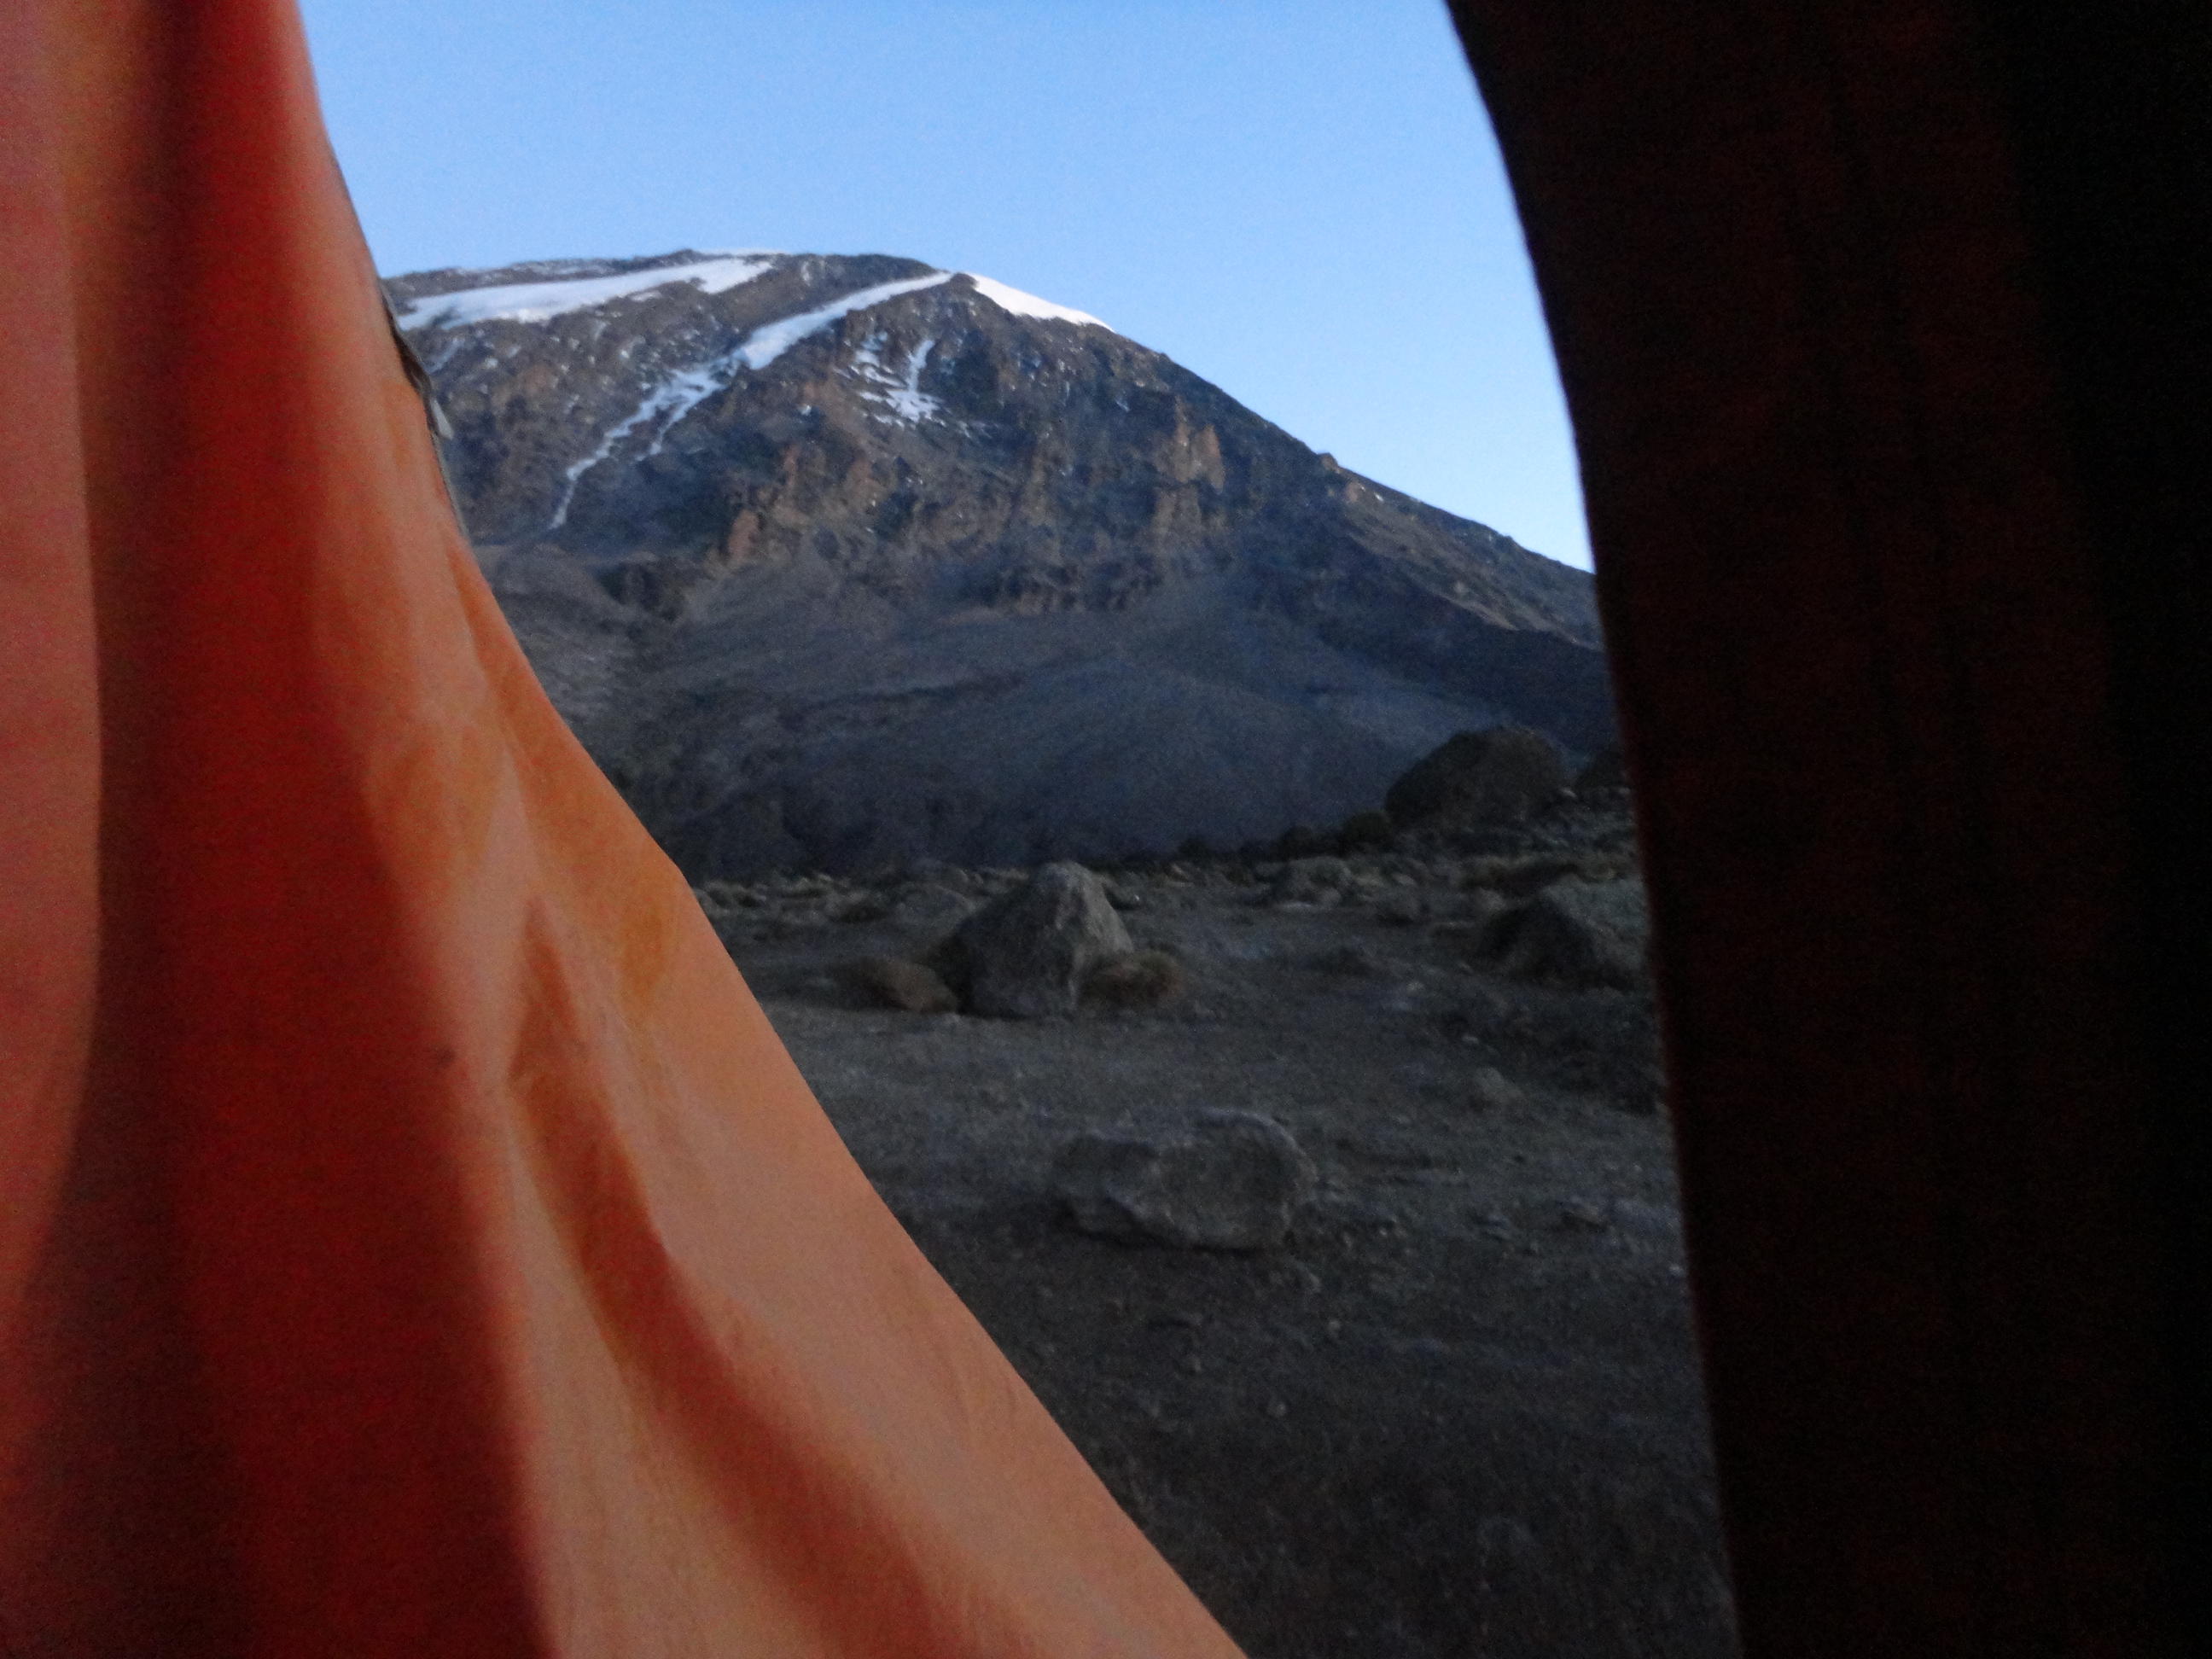 View of Kilimanjaro from the Tent